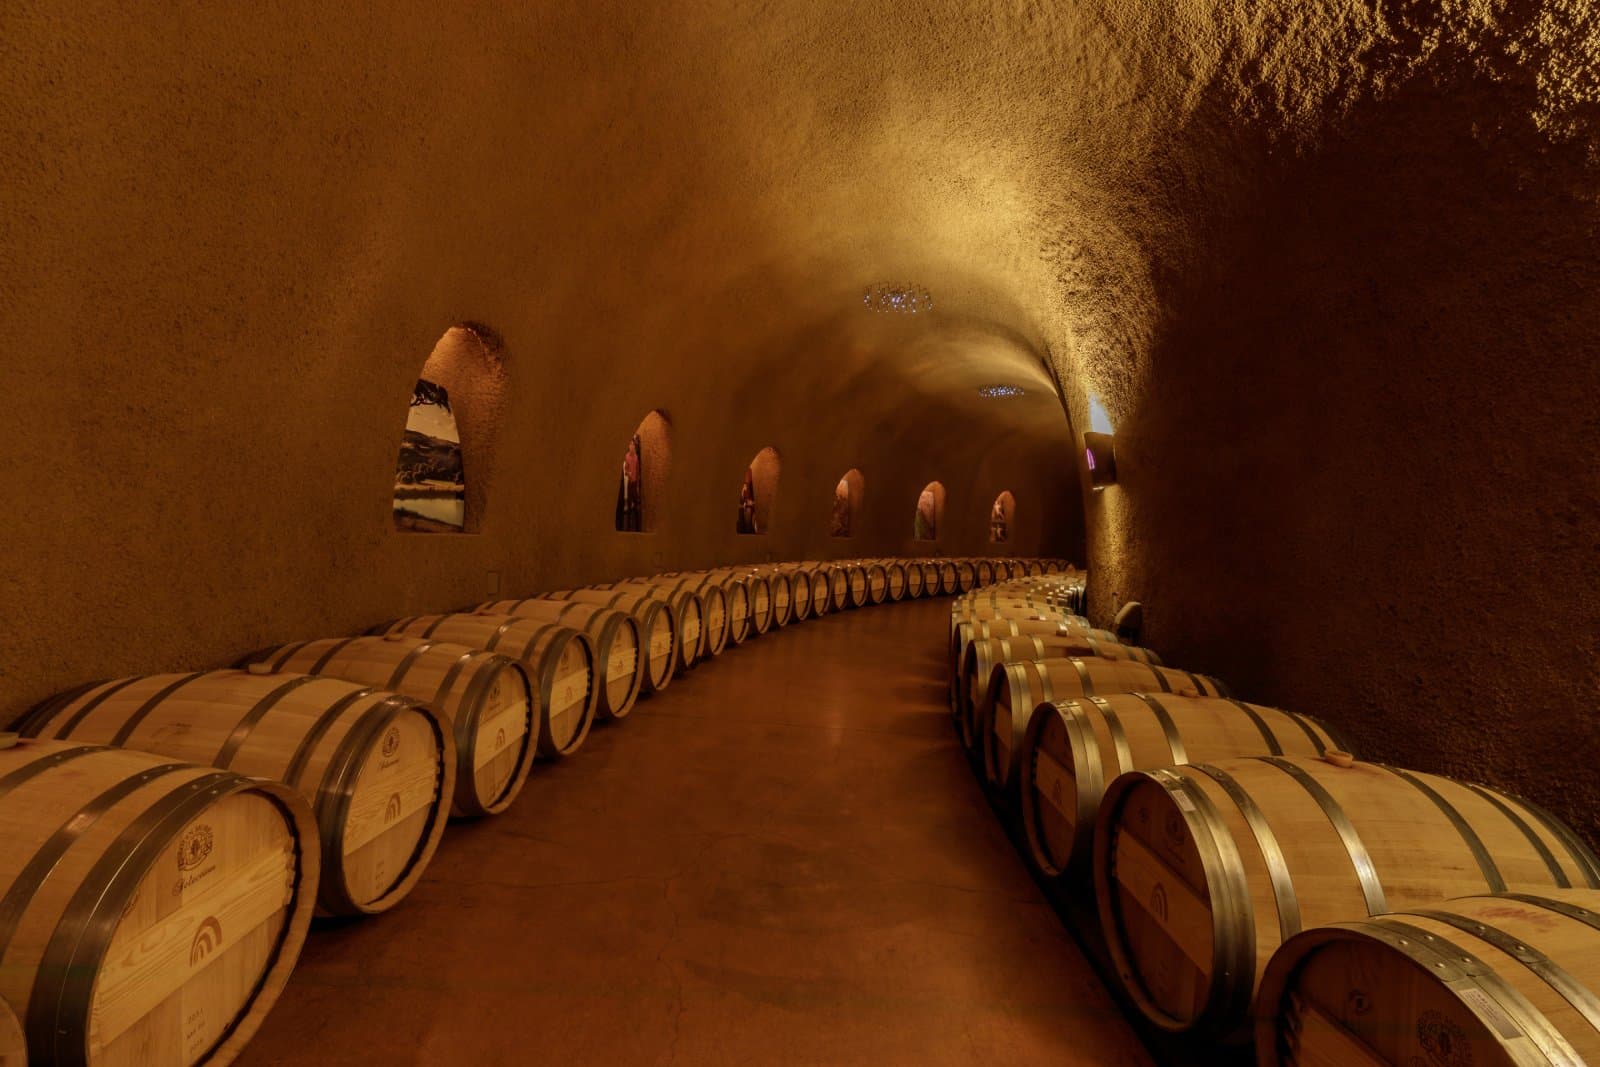 <p class="wp-caption-text">Image Credit: Shutterstock / yhelfman</p>  <p><span>Jarvis Estate offers an extraordinary wine tasting experience, set within the heart of a cave system carved into the Vaca Mountains. This unique setting provides a constant, cool climate ideal for wine aging, and visitors are invited to explore the cave’s tunnels to discover the winemaking process from barrel to bottle. The estate specializes in estate-grown, limited-production wines, offering tastings highlighting their vineyards’ distinct terroir. Jarvis Estate combines innovation with tradition, providing a wine-tasting experience that is as educational as it is memorable.</span></p>